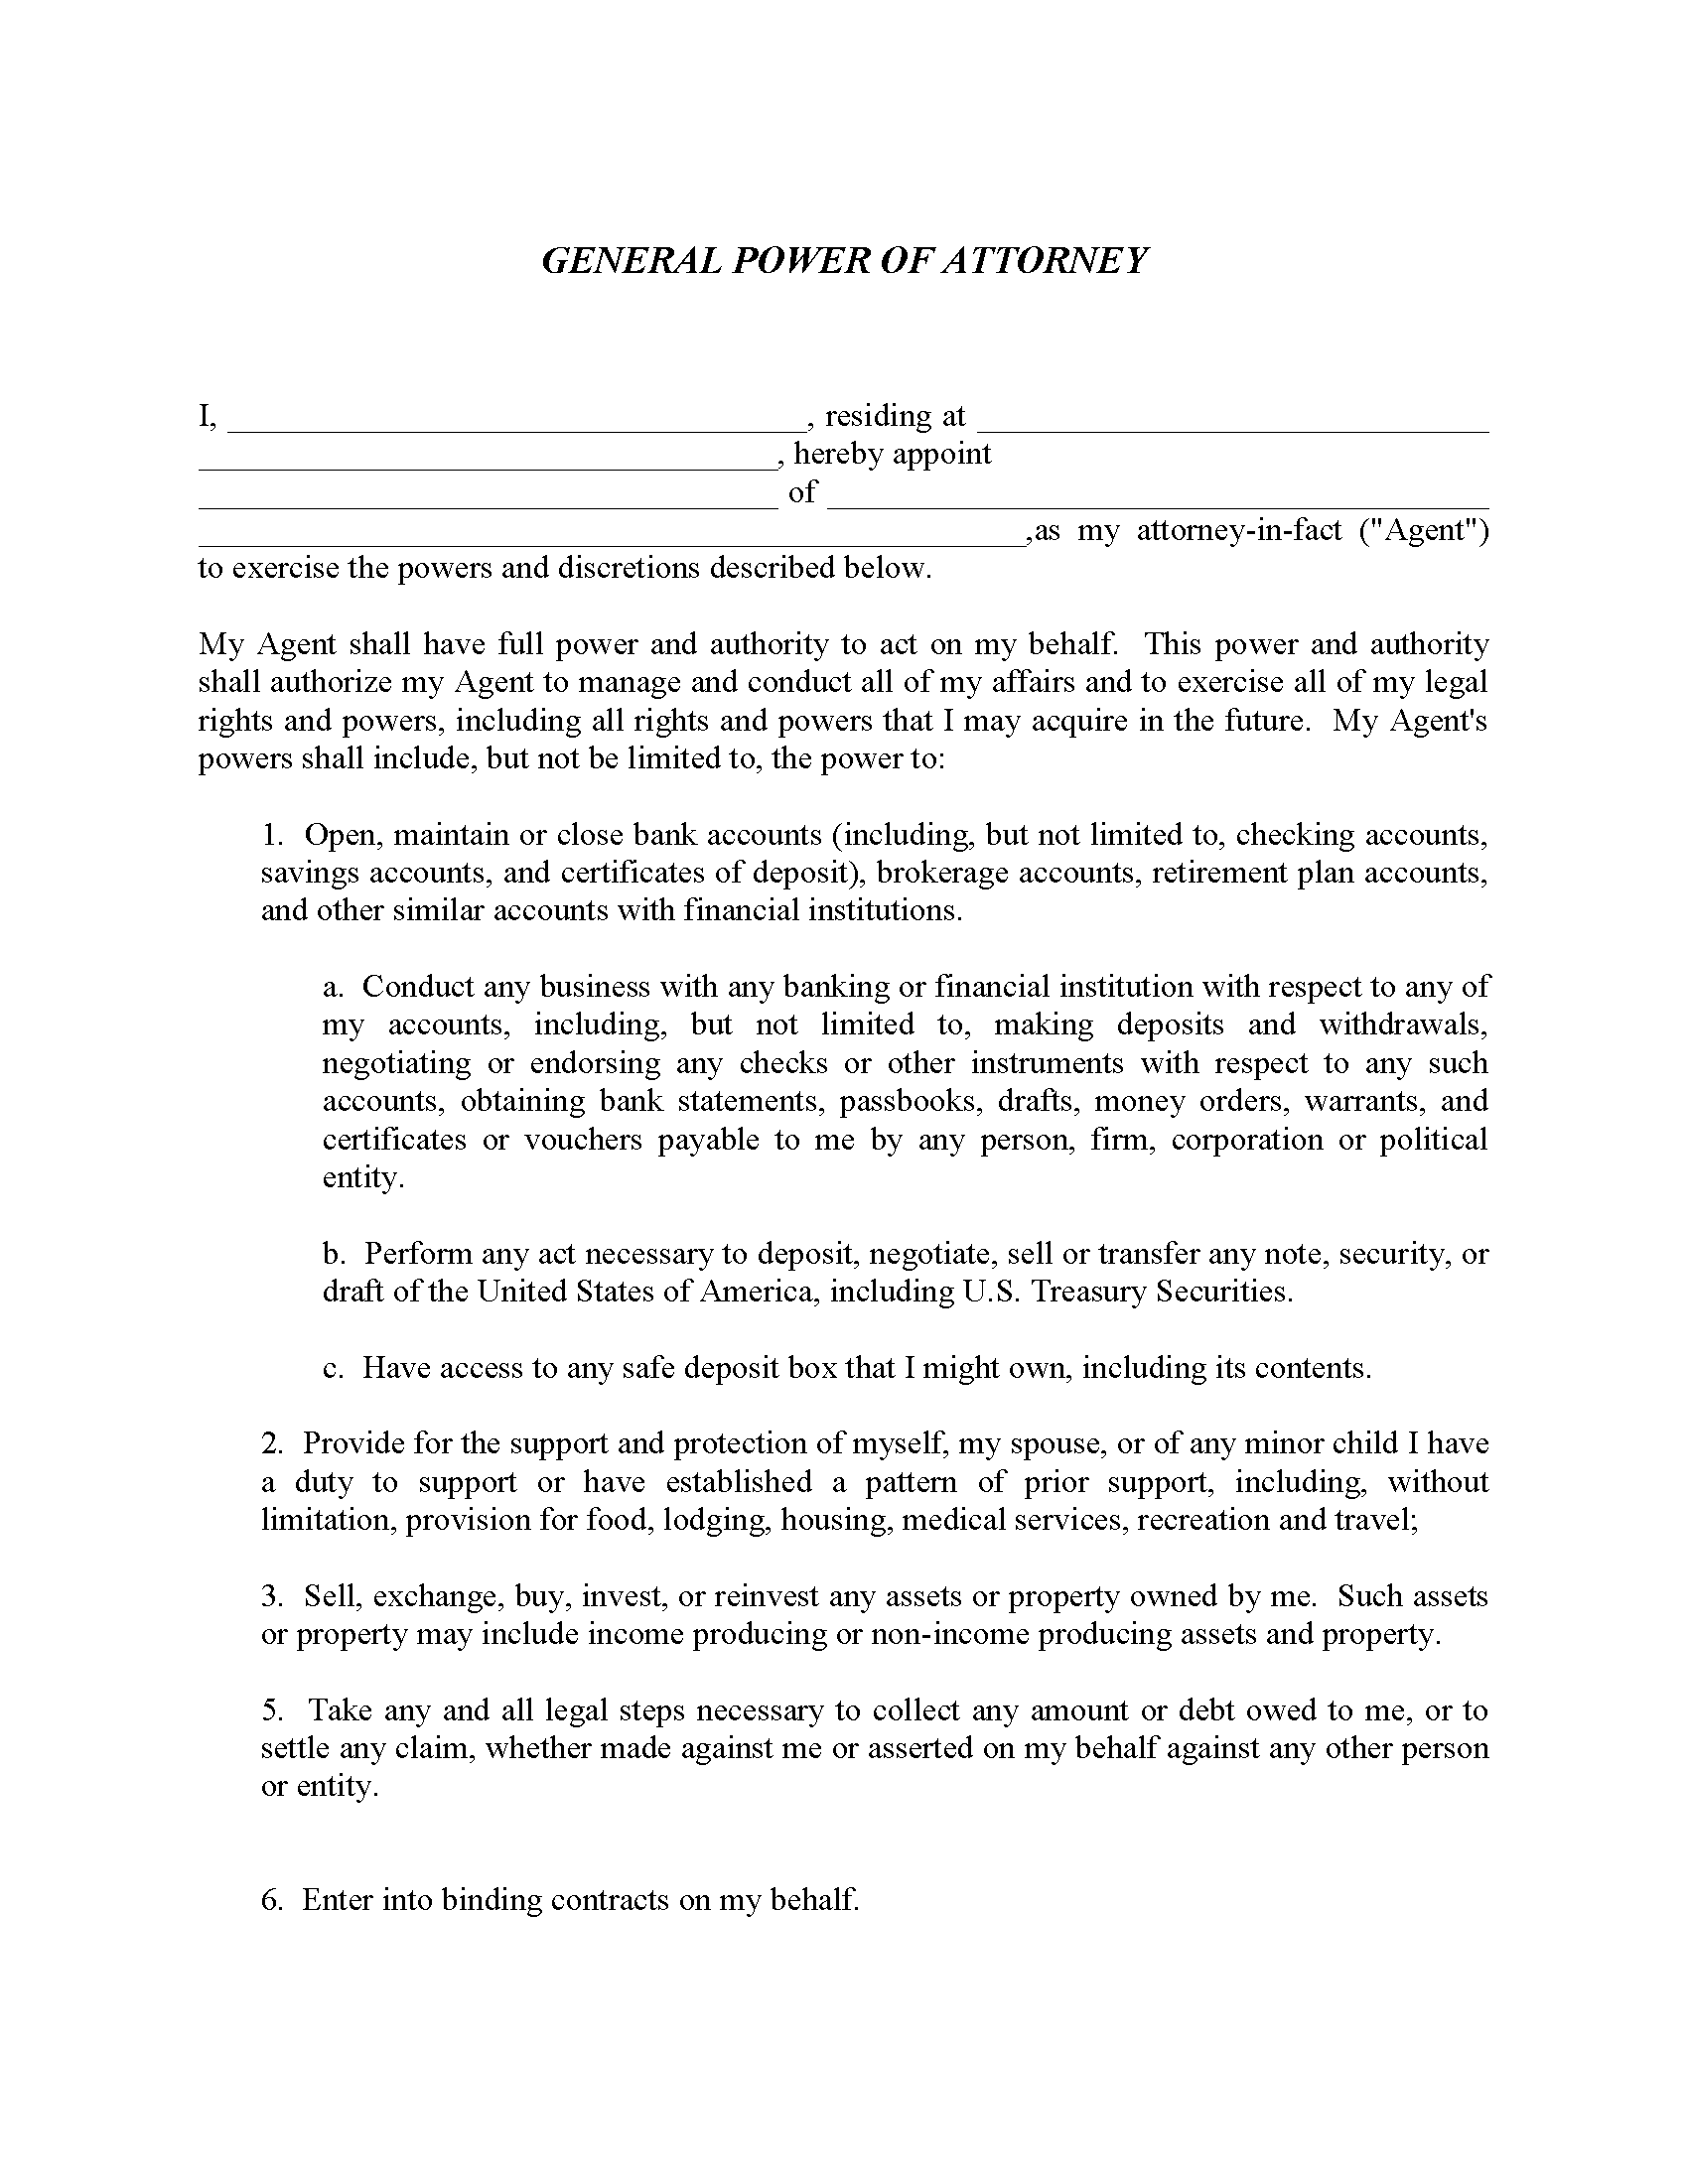 power-of-attorney-printable-form